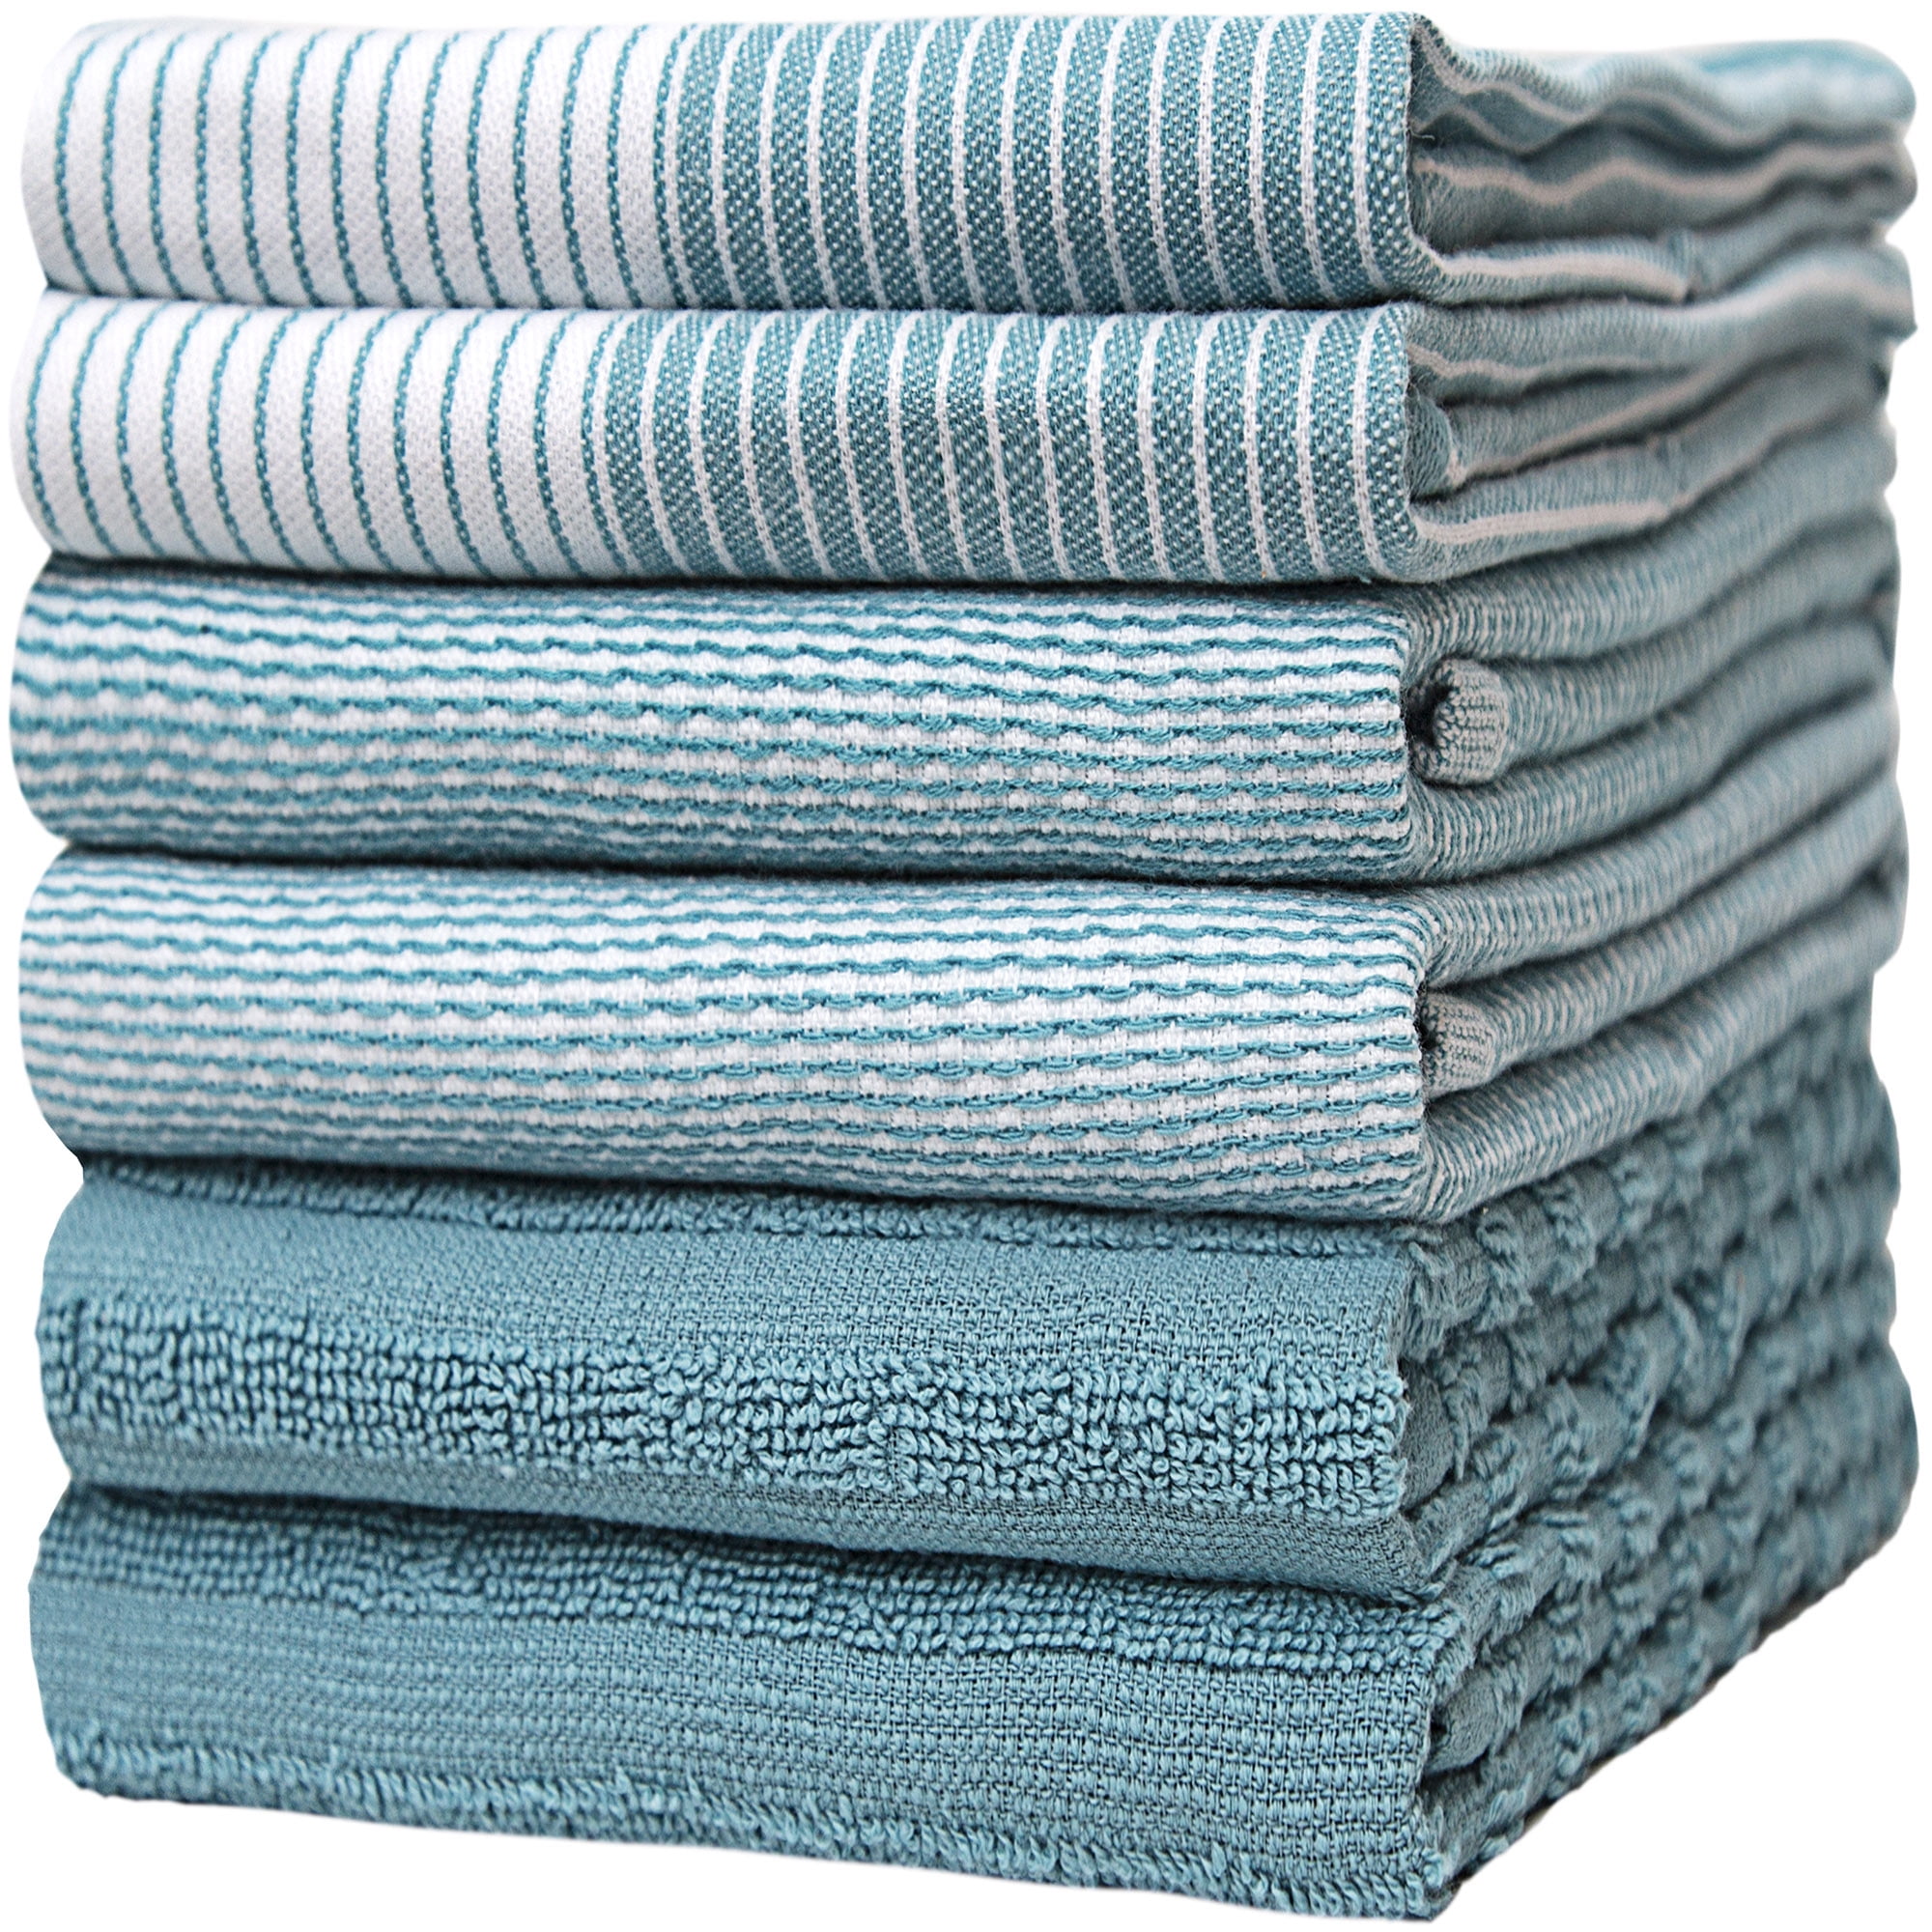 Infinitee Xclusives Premium Kitchen Towels | Pack of 6 | 15x25 inch 100% Cotton Green Tea Towels Set for Drying Dishes | 425gsm Absorbent Dish Towel